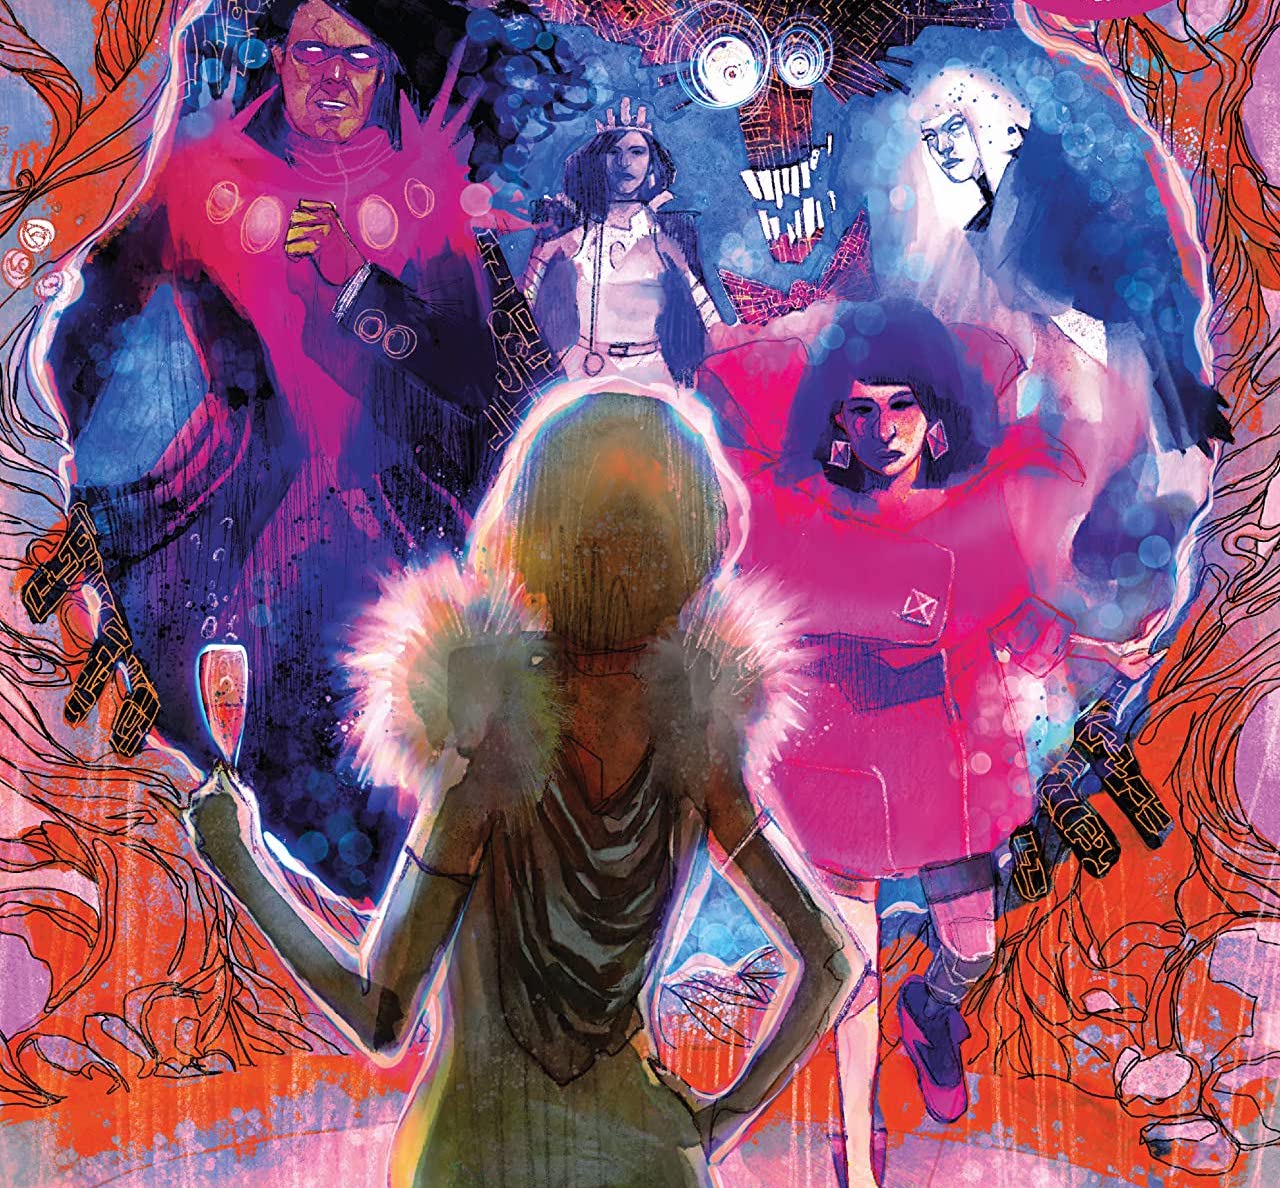 'New Mutants' #19 grabs some drinks and snacks at the Hellfire Gala